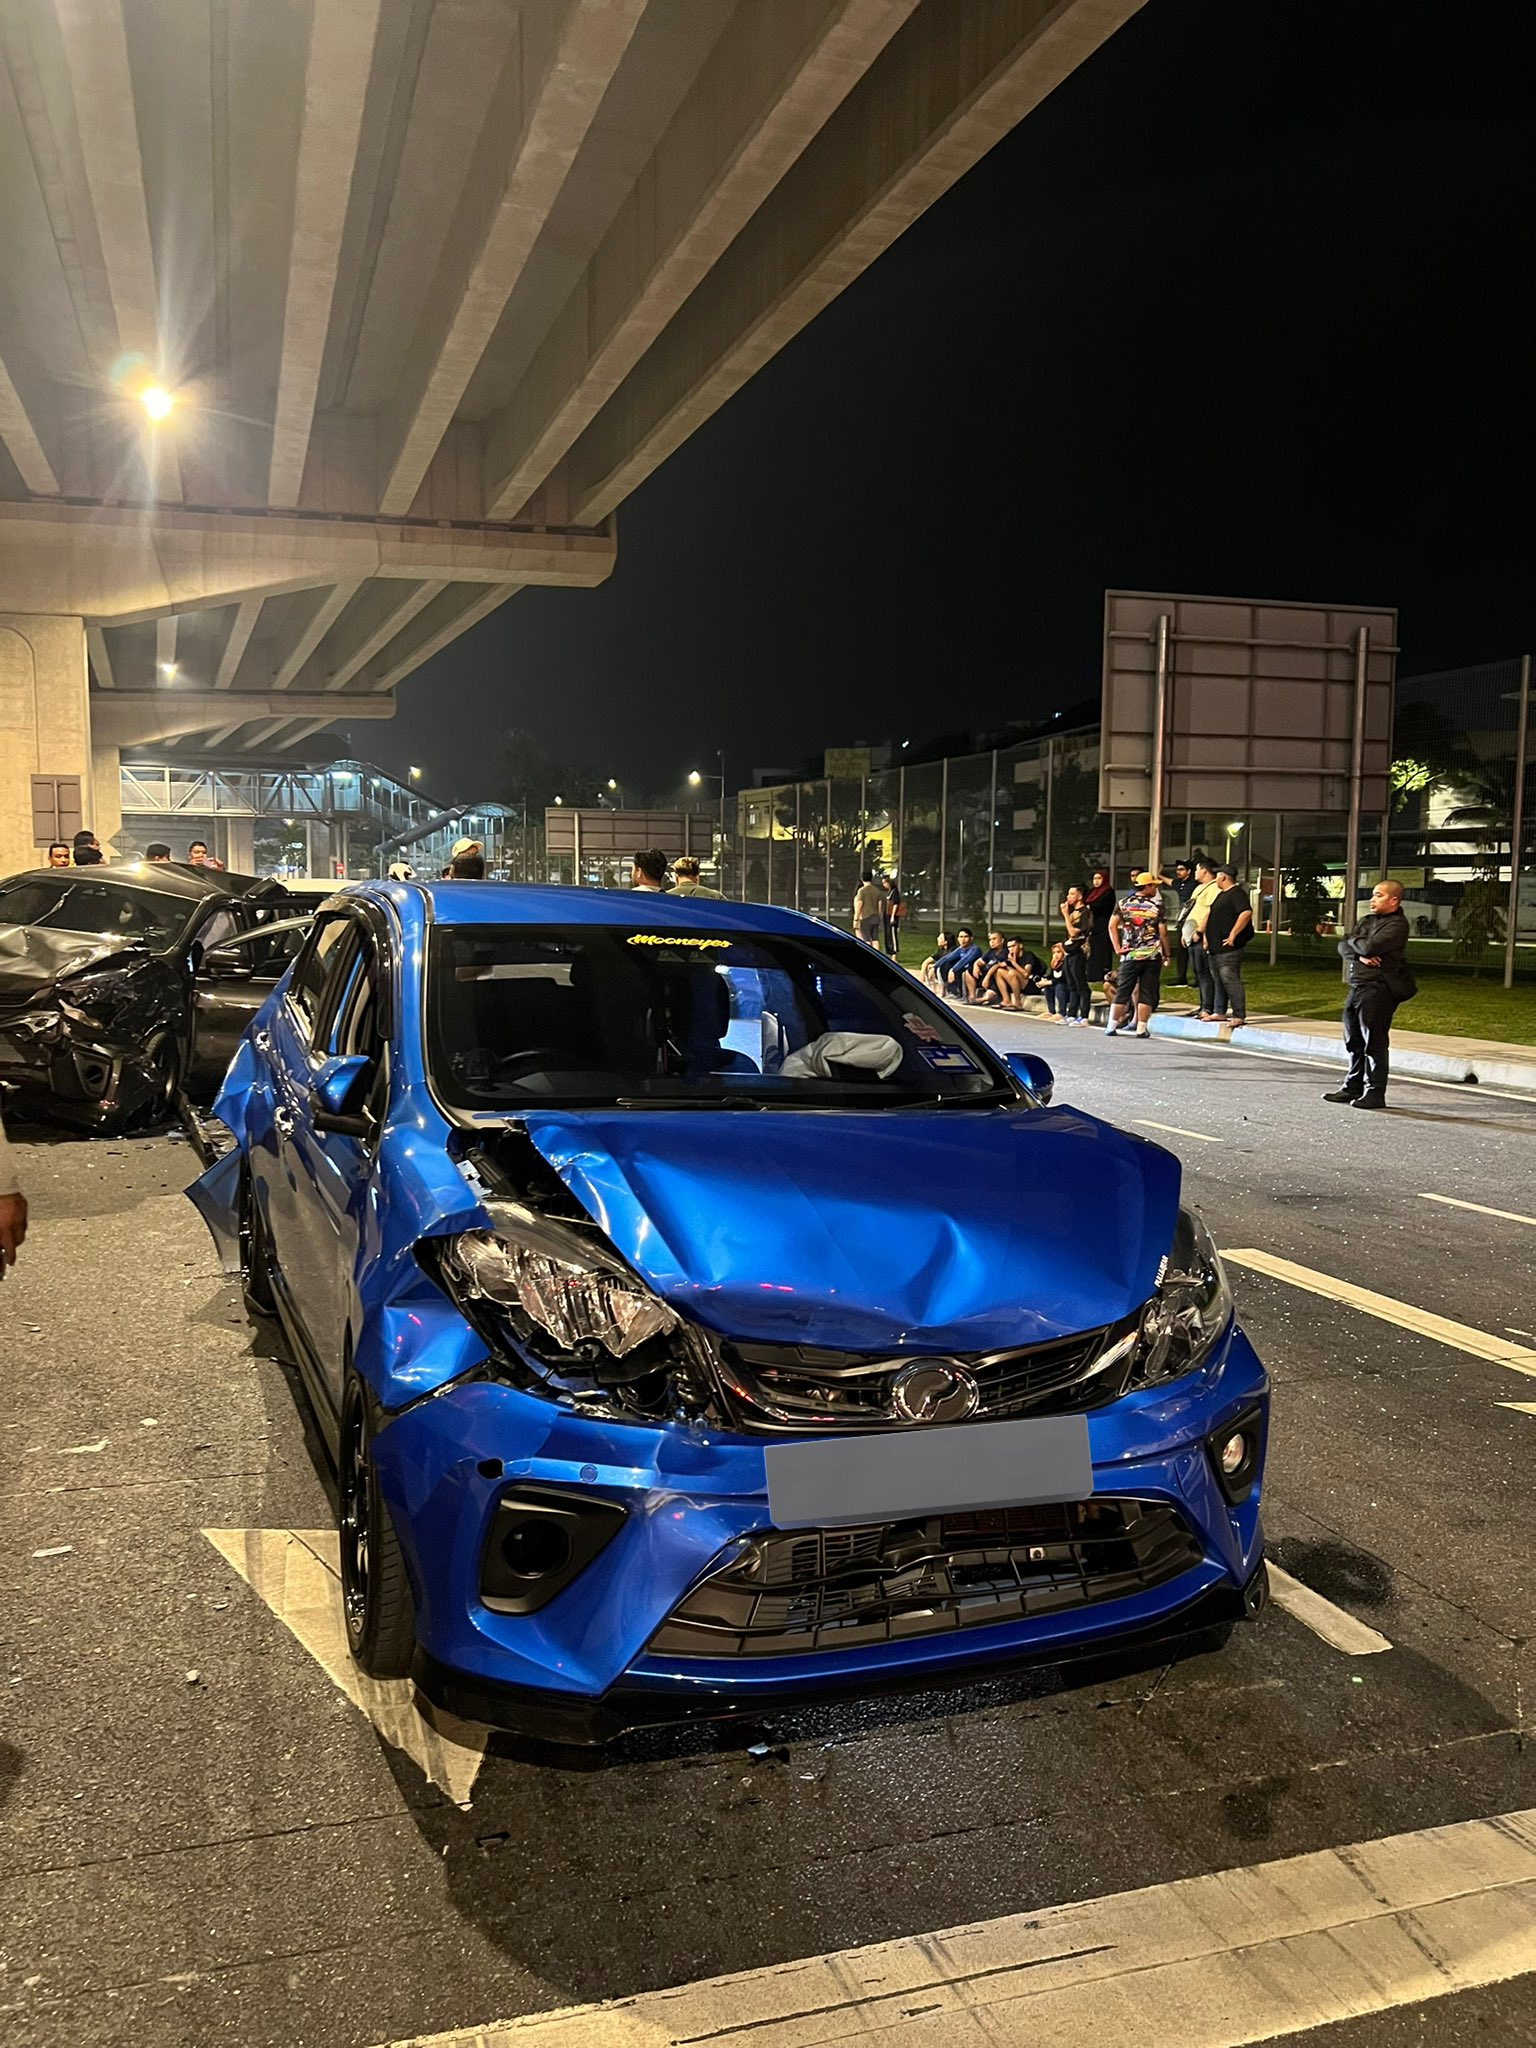 Myvi gets destroyed in crash at traffic light, driver who caused accident denies she was drink driving | weirdkaya